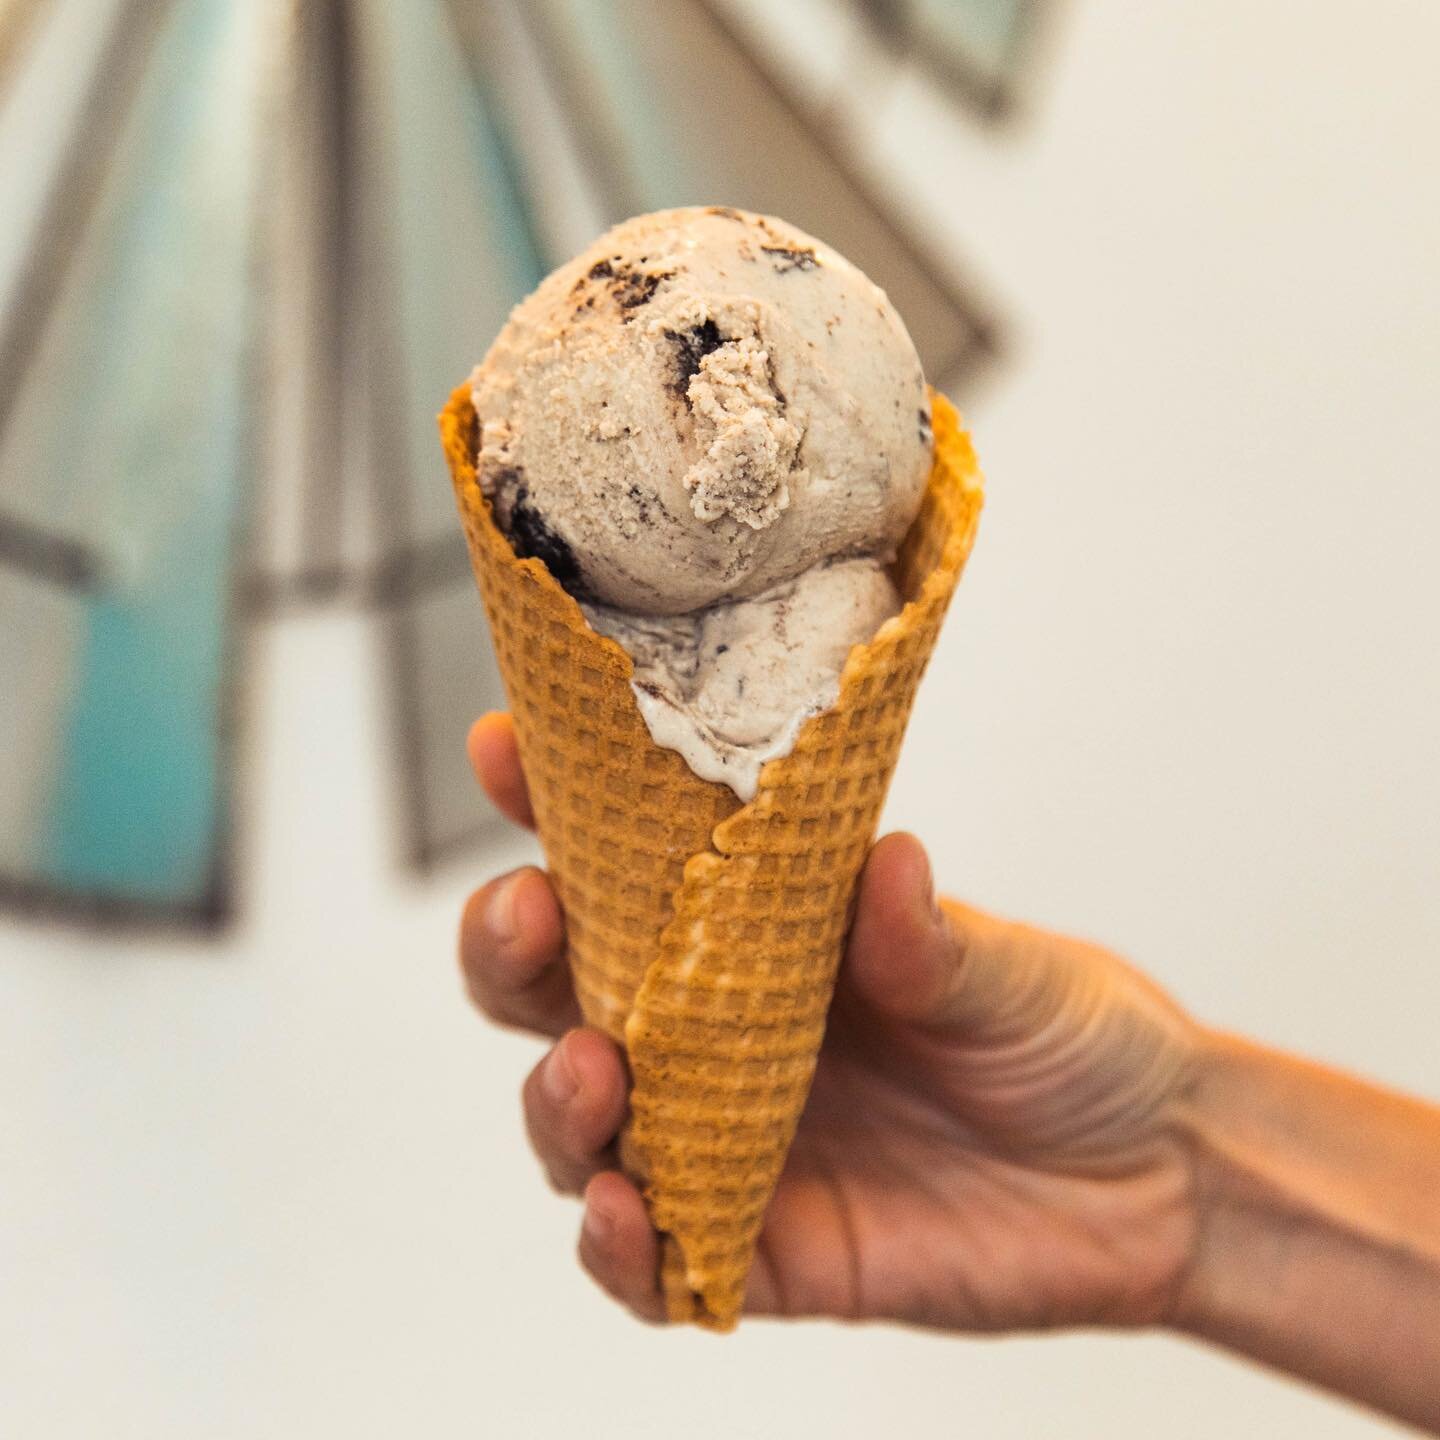 Happy National Ice Cream Day! We might be closed today, but you can celebrate with us all week long starting tomorrow! 

Did you know you can get your favorite ice cream in pints and quarts? It&rsquo;s the perfect solution for a Sunday when you still